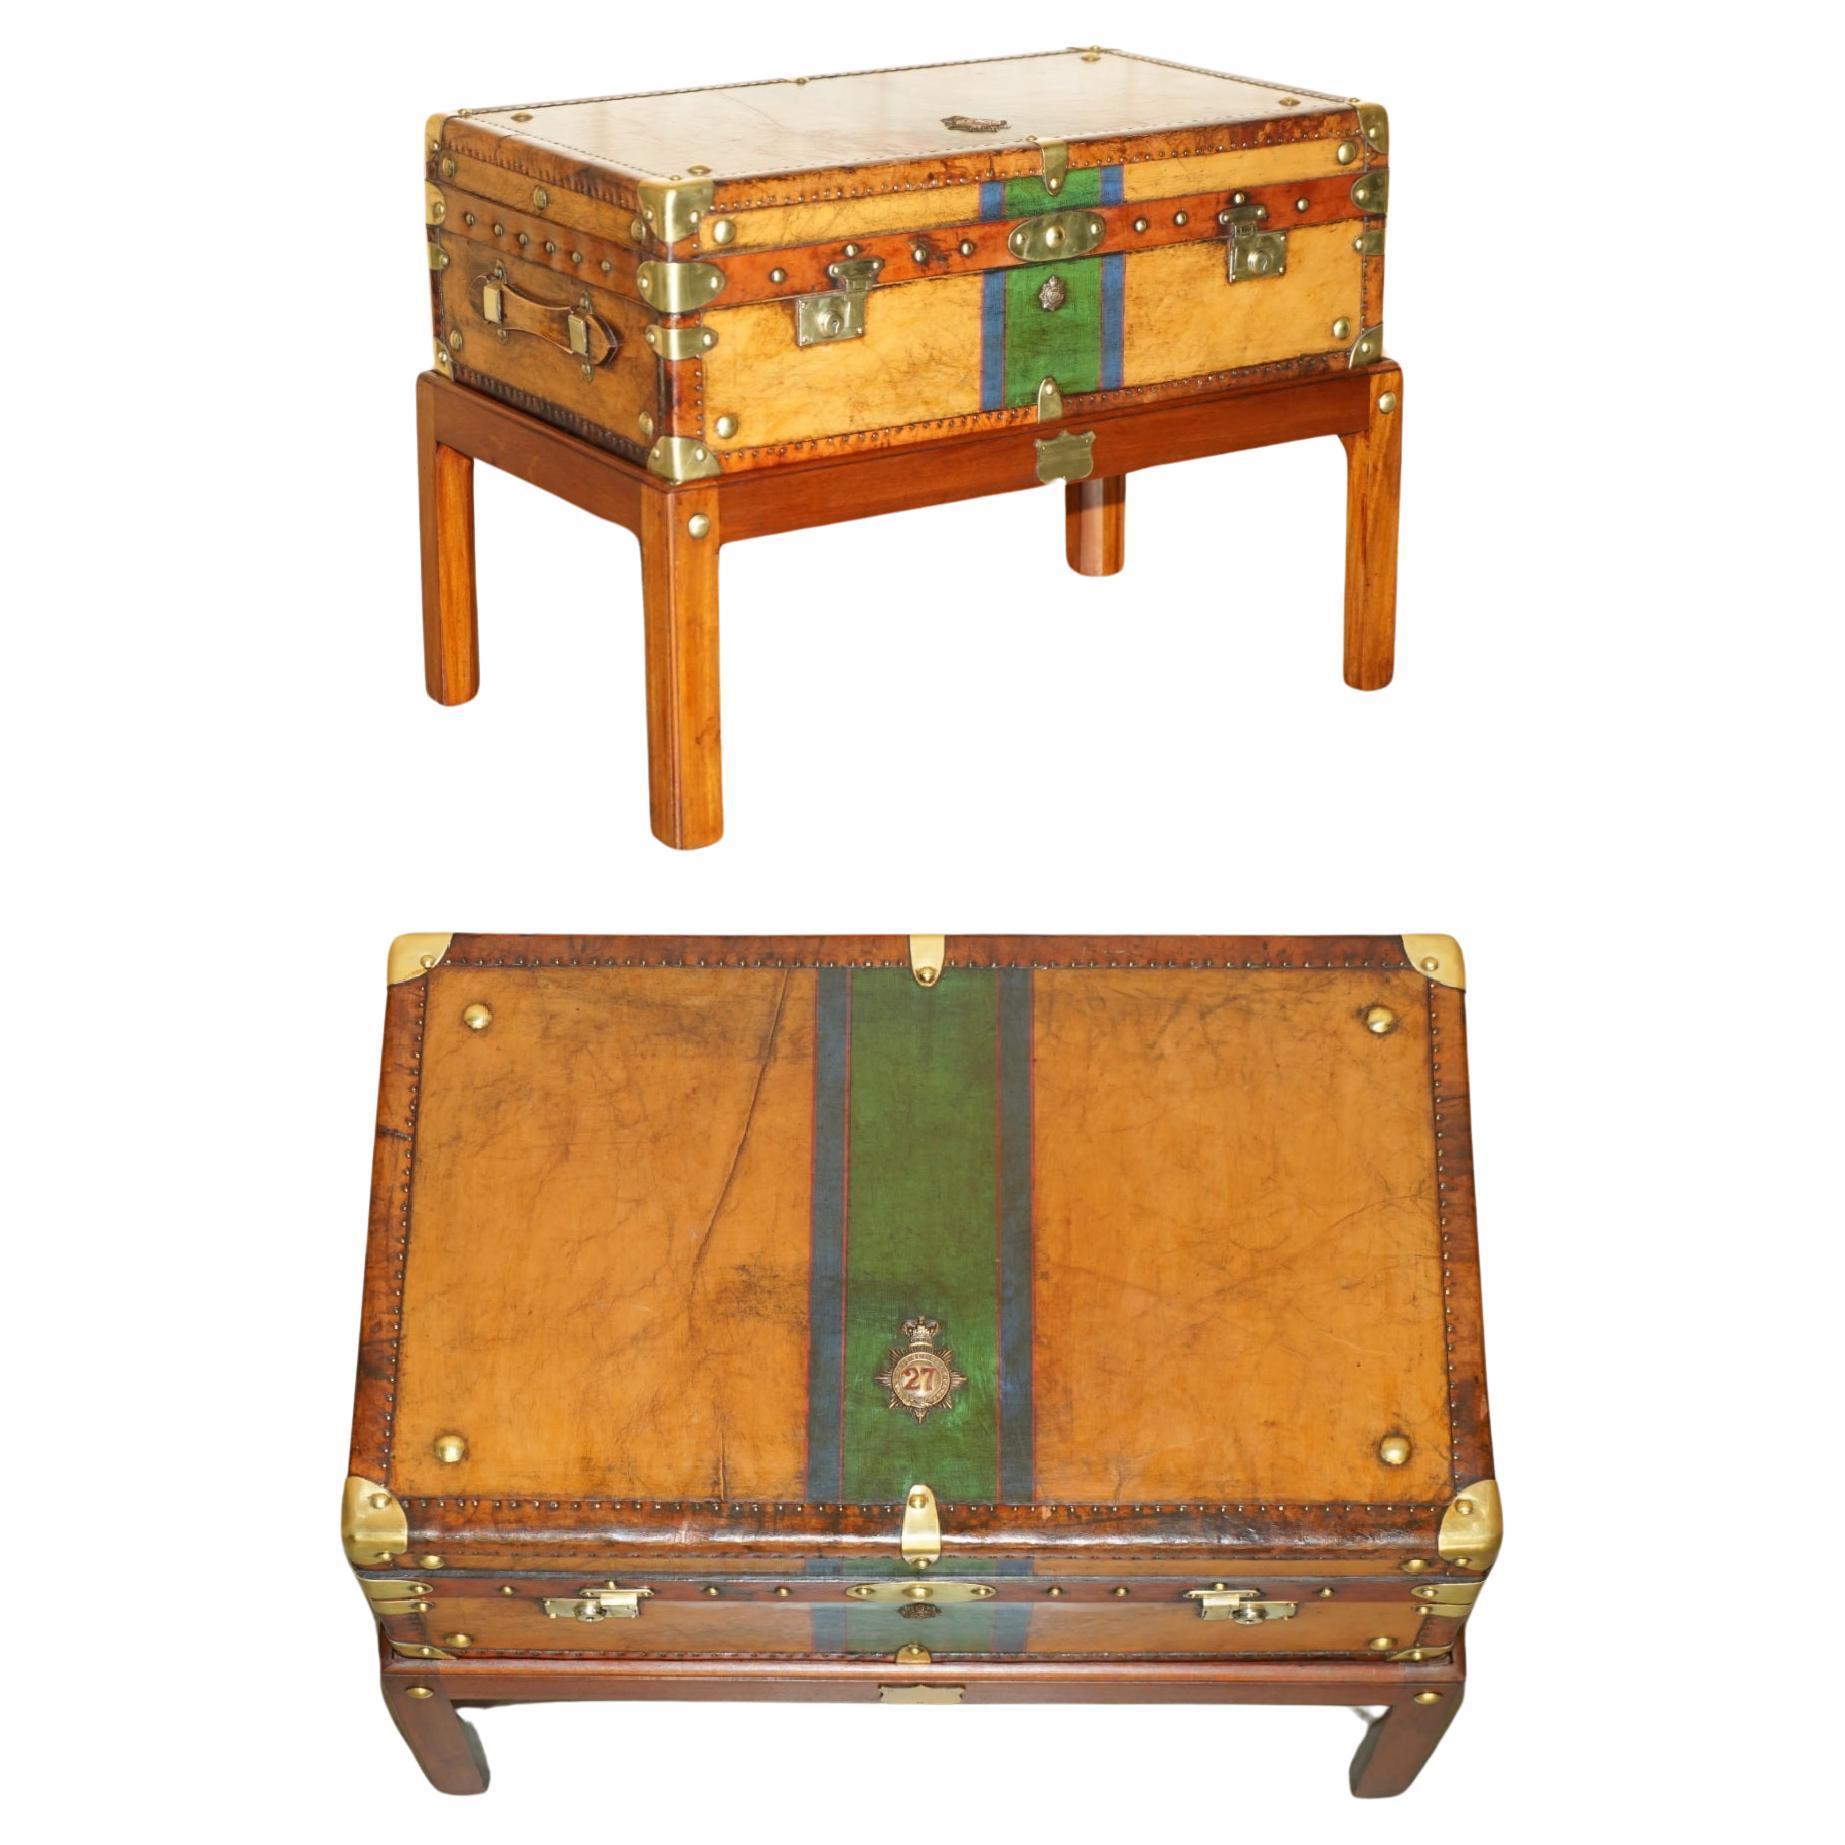 RESTORED BRITISH ARMY BROWN LEATHER TRUNK COFFEE TABLE HONI SOIT QUI MAL Y PENSe For Sale